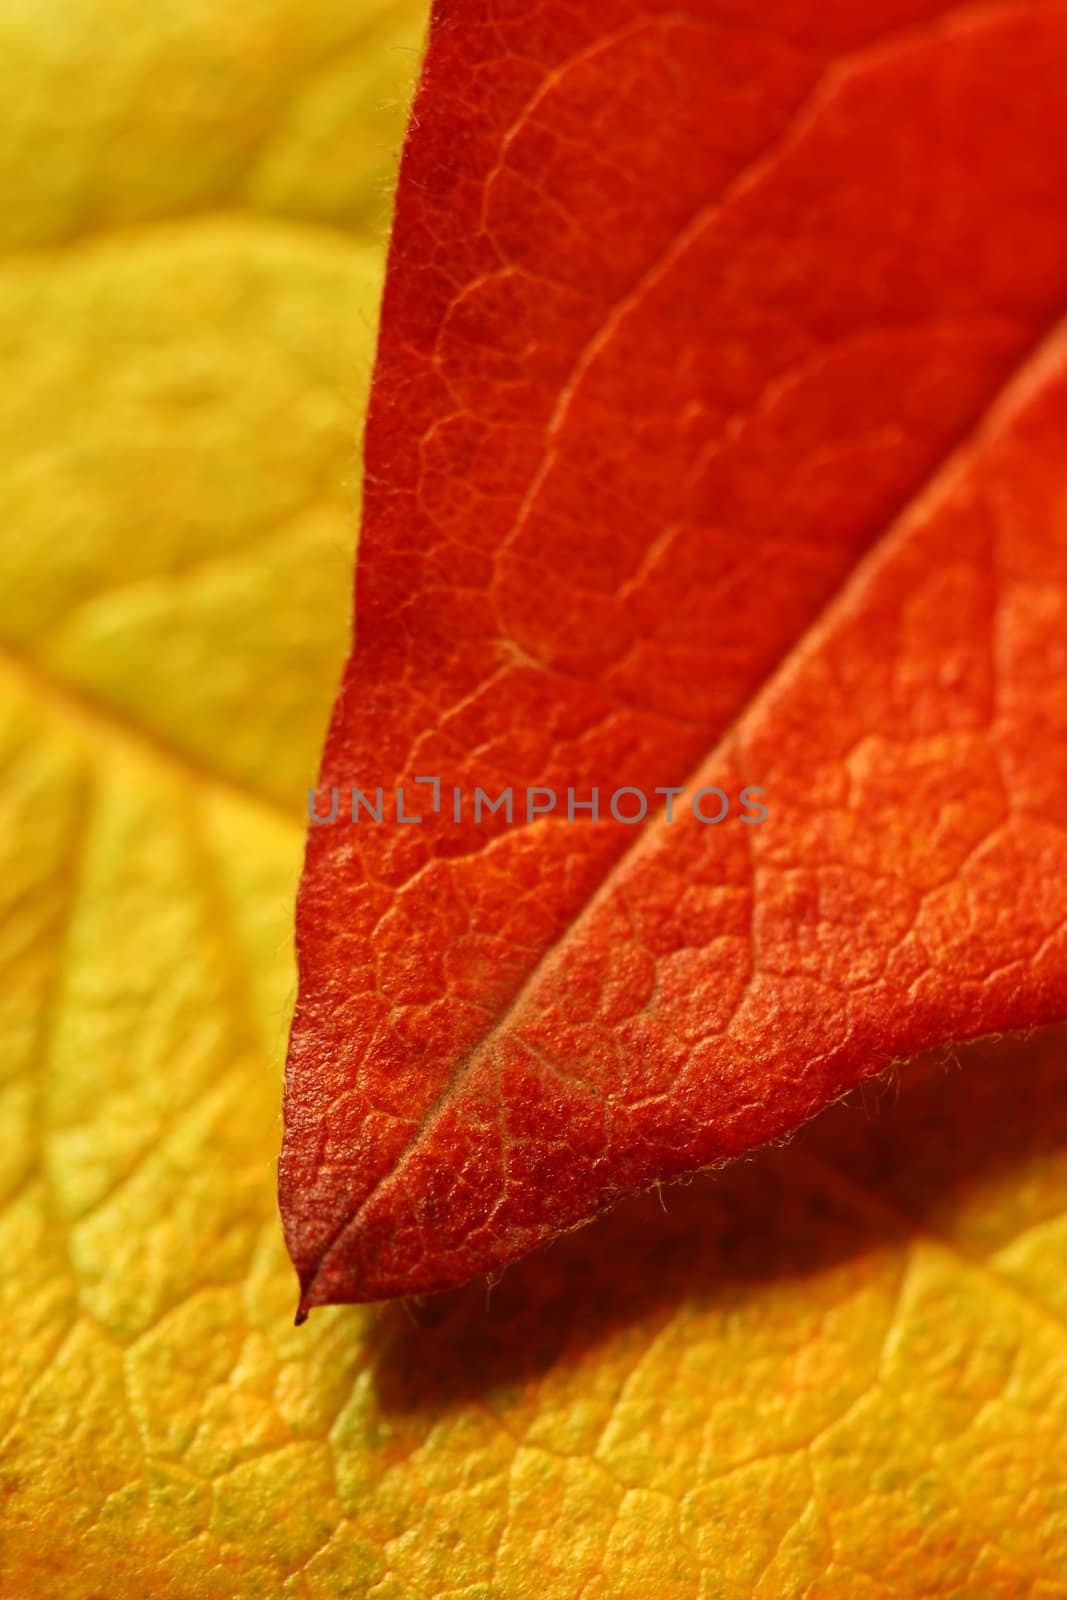 Overlapping Autumn leaves of contrasting color - shallow depth of field